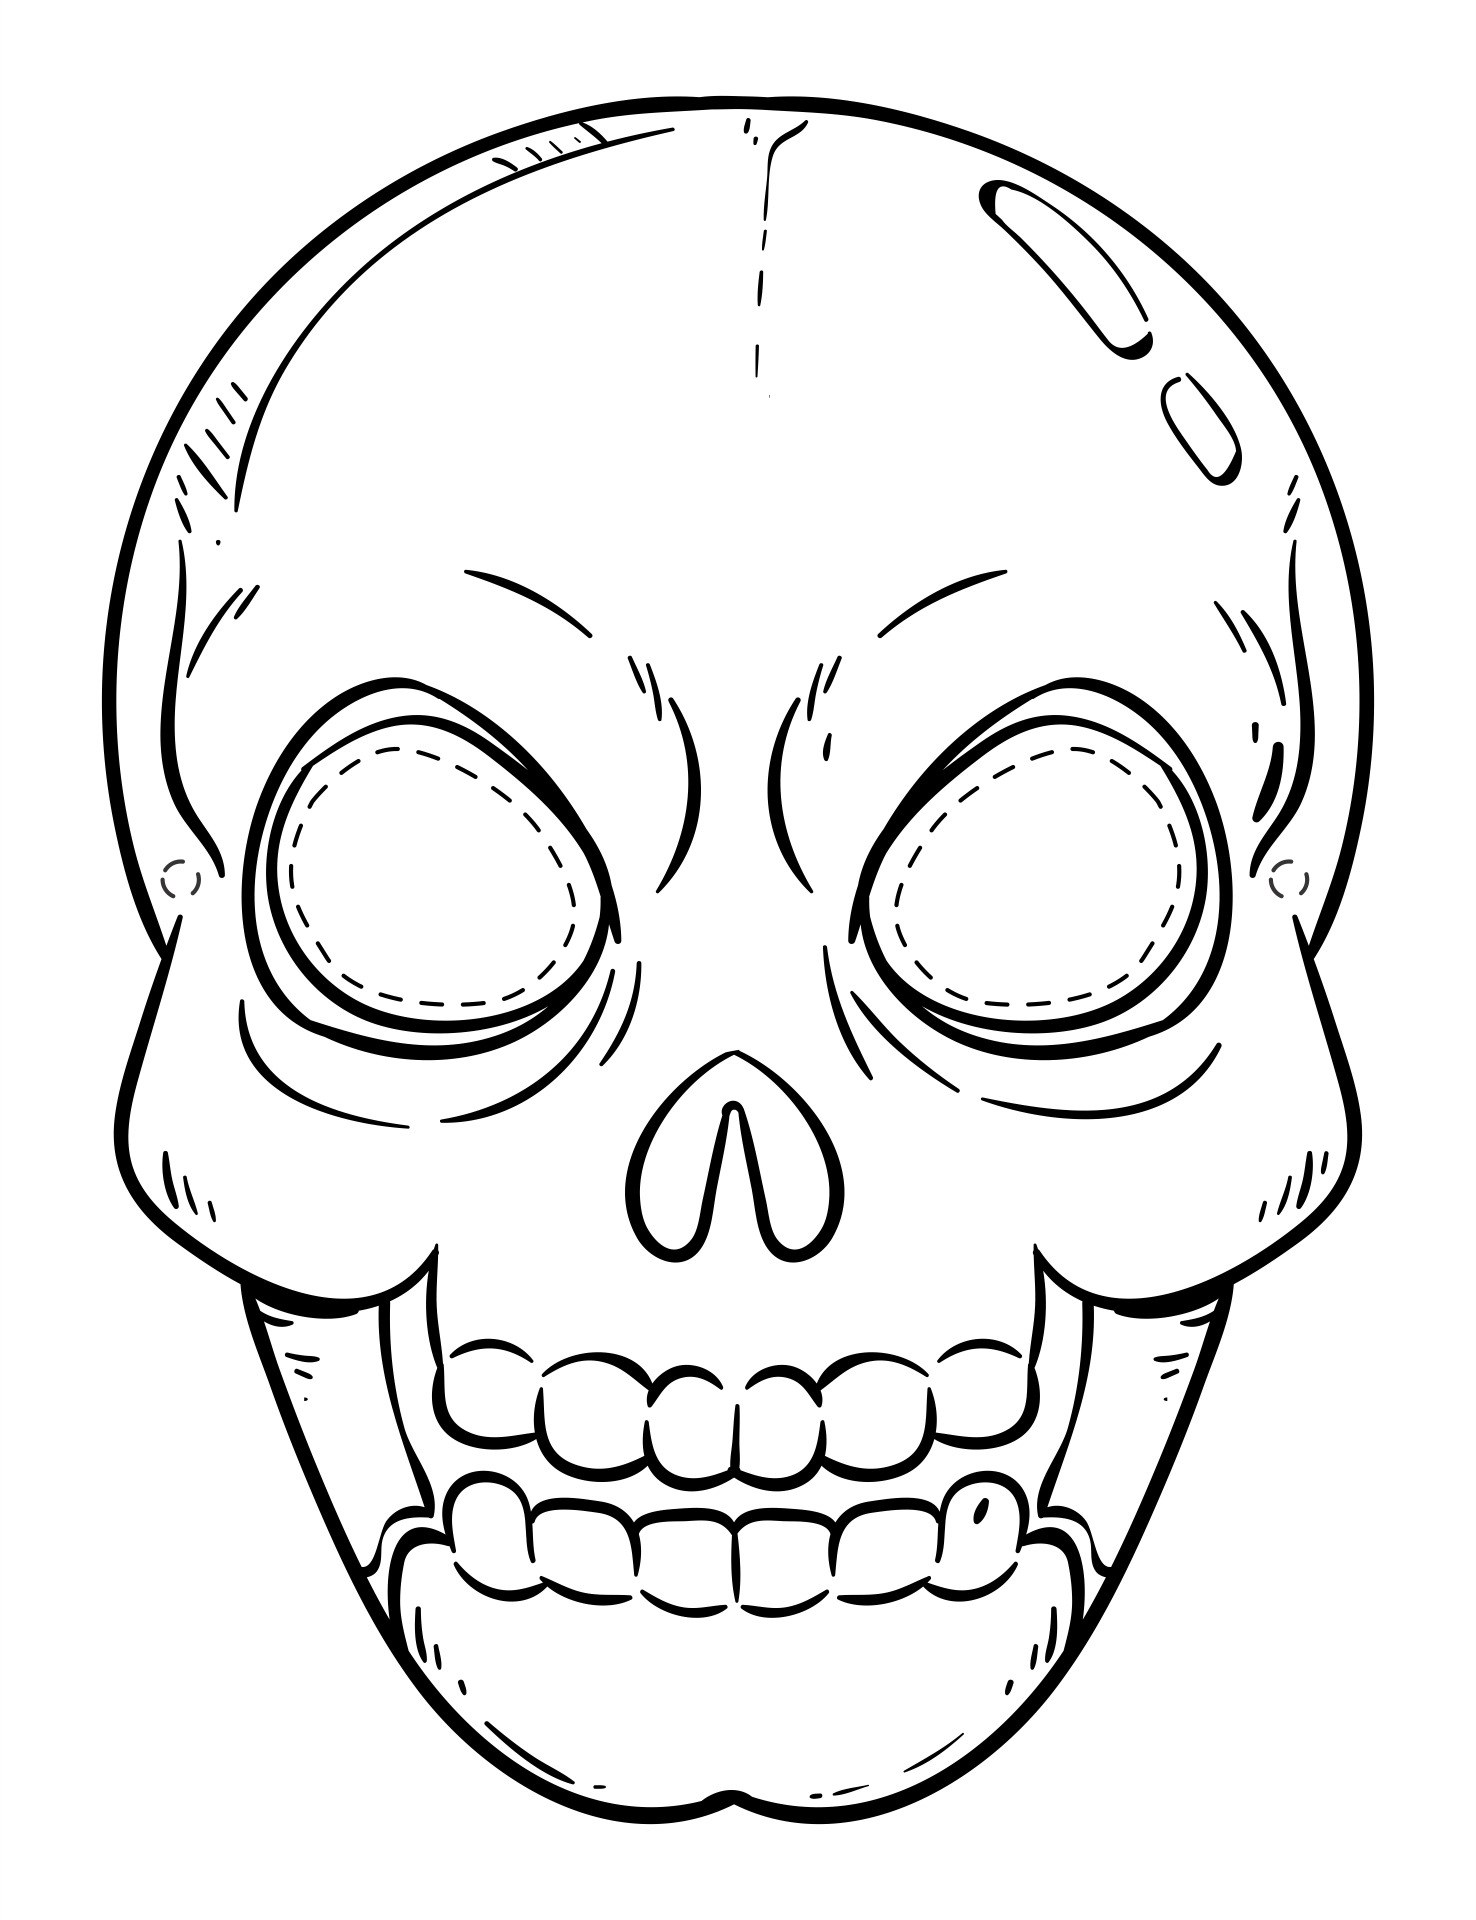 8 Best Images of Printable Halloween Masks To Color Printable